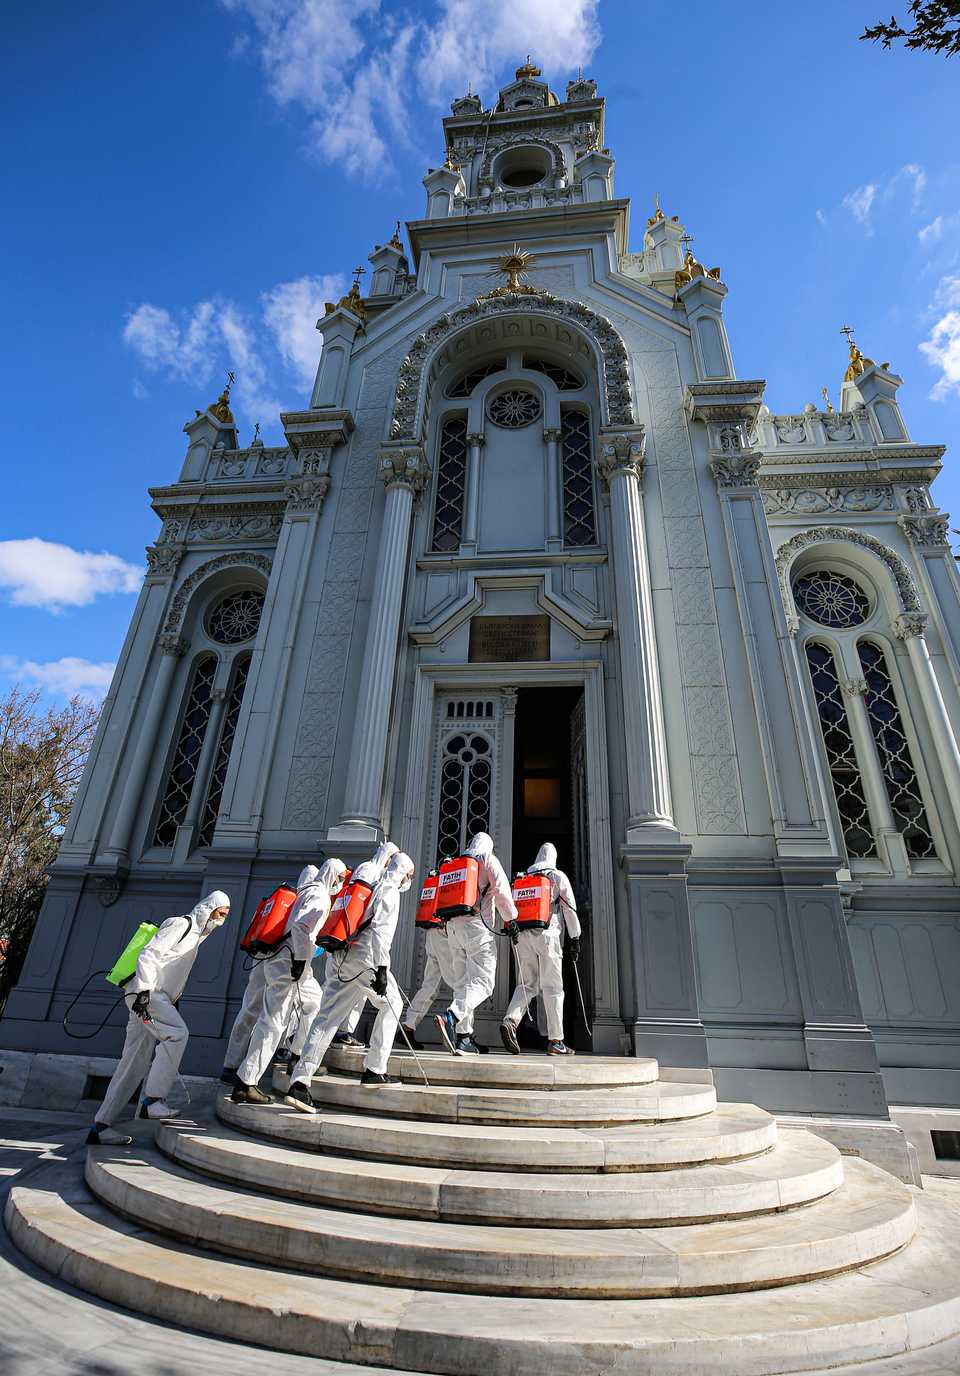 Workers in hazard gear move in to disinfect Sveti Stefan Church at Balat district as part of a campaign against the Covid-19 virus